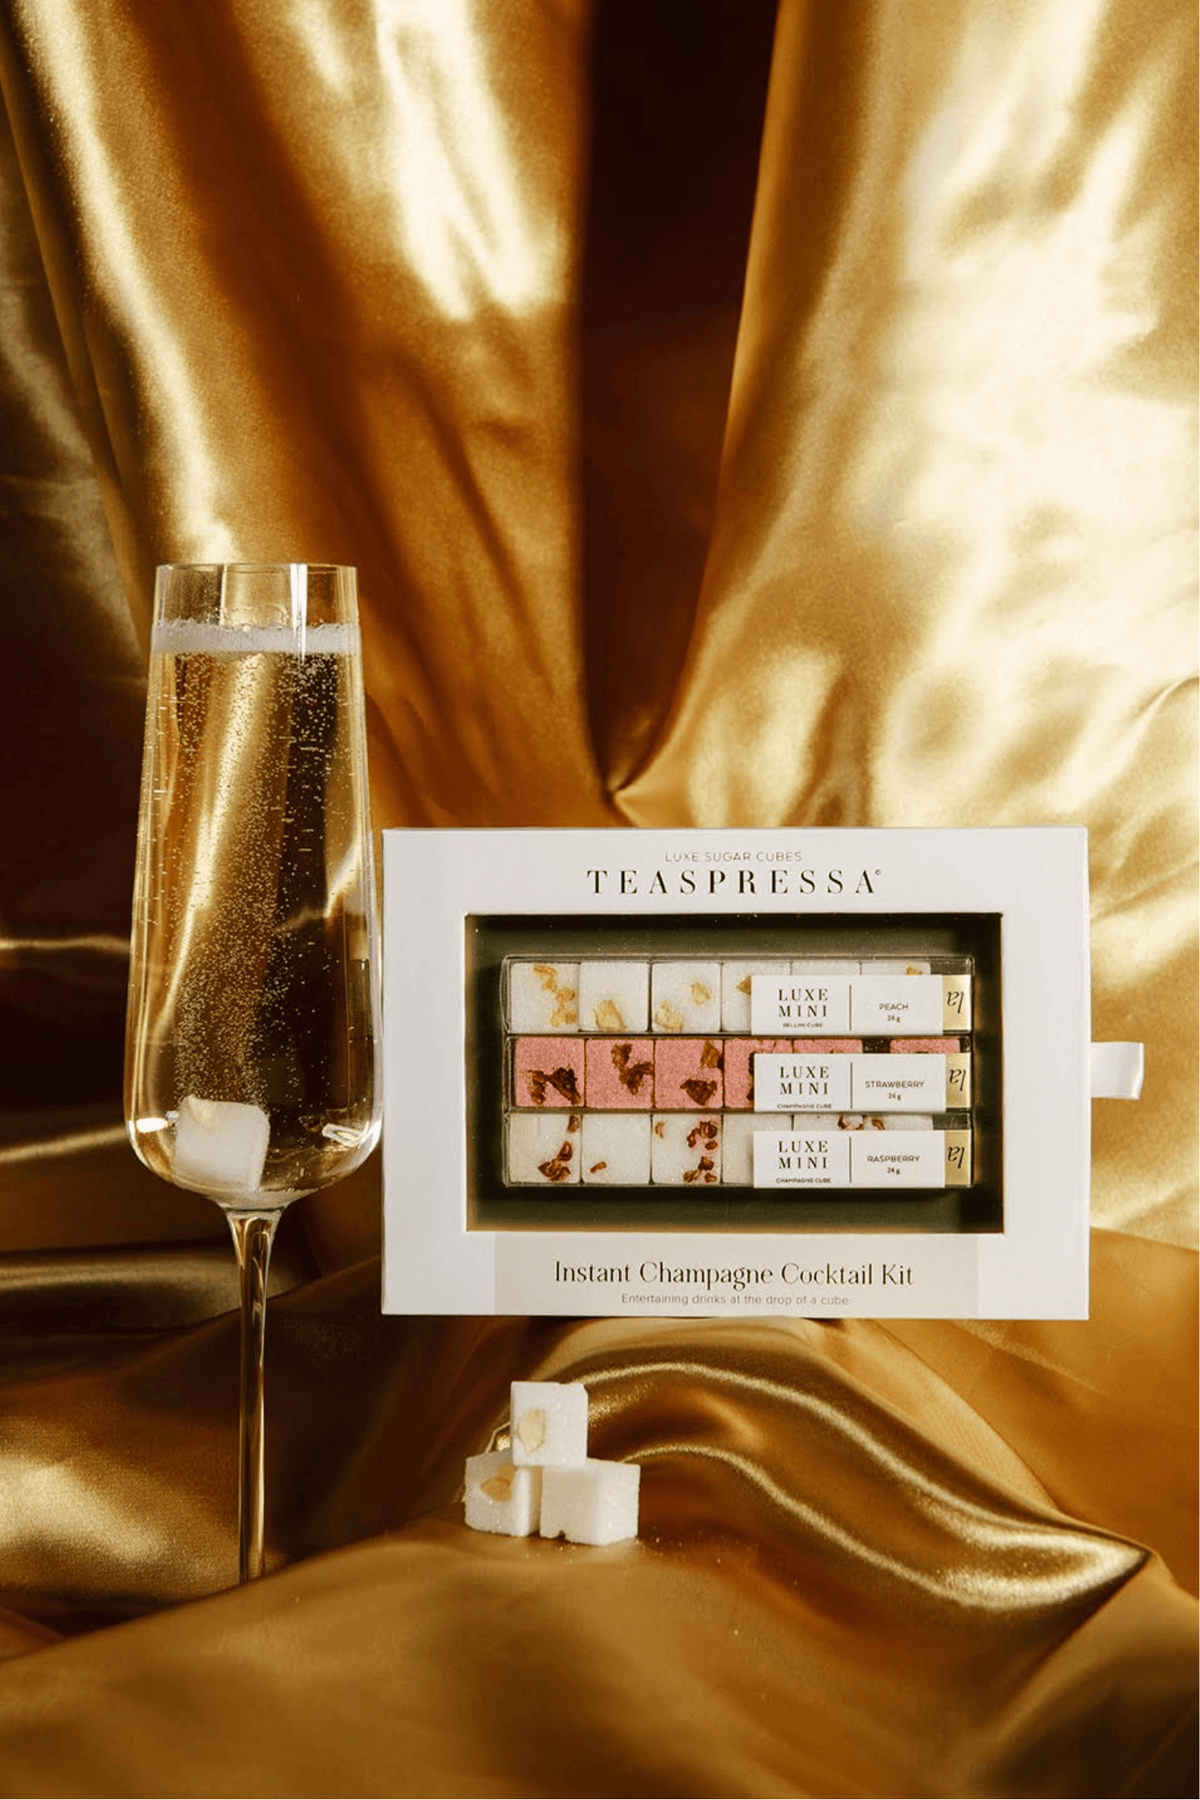 Instant Citrus Mimosa Kit – Lord & Taylor